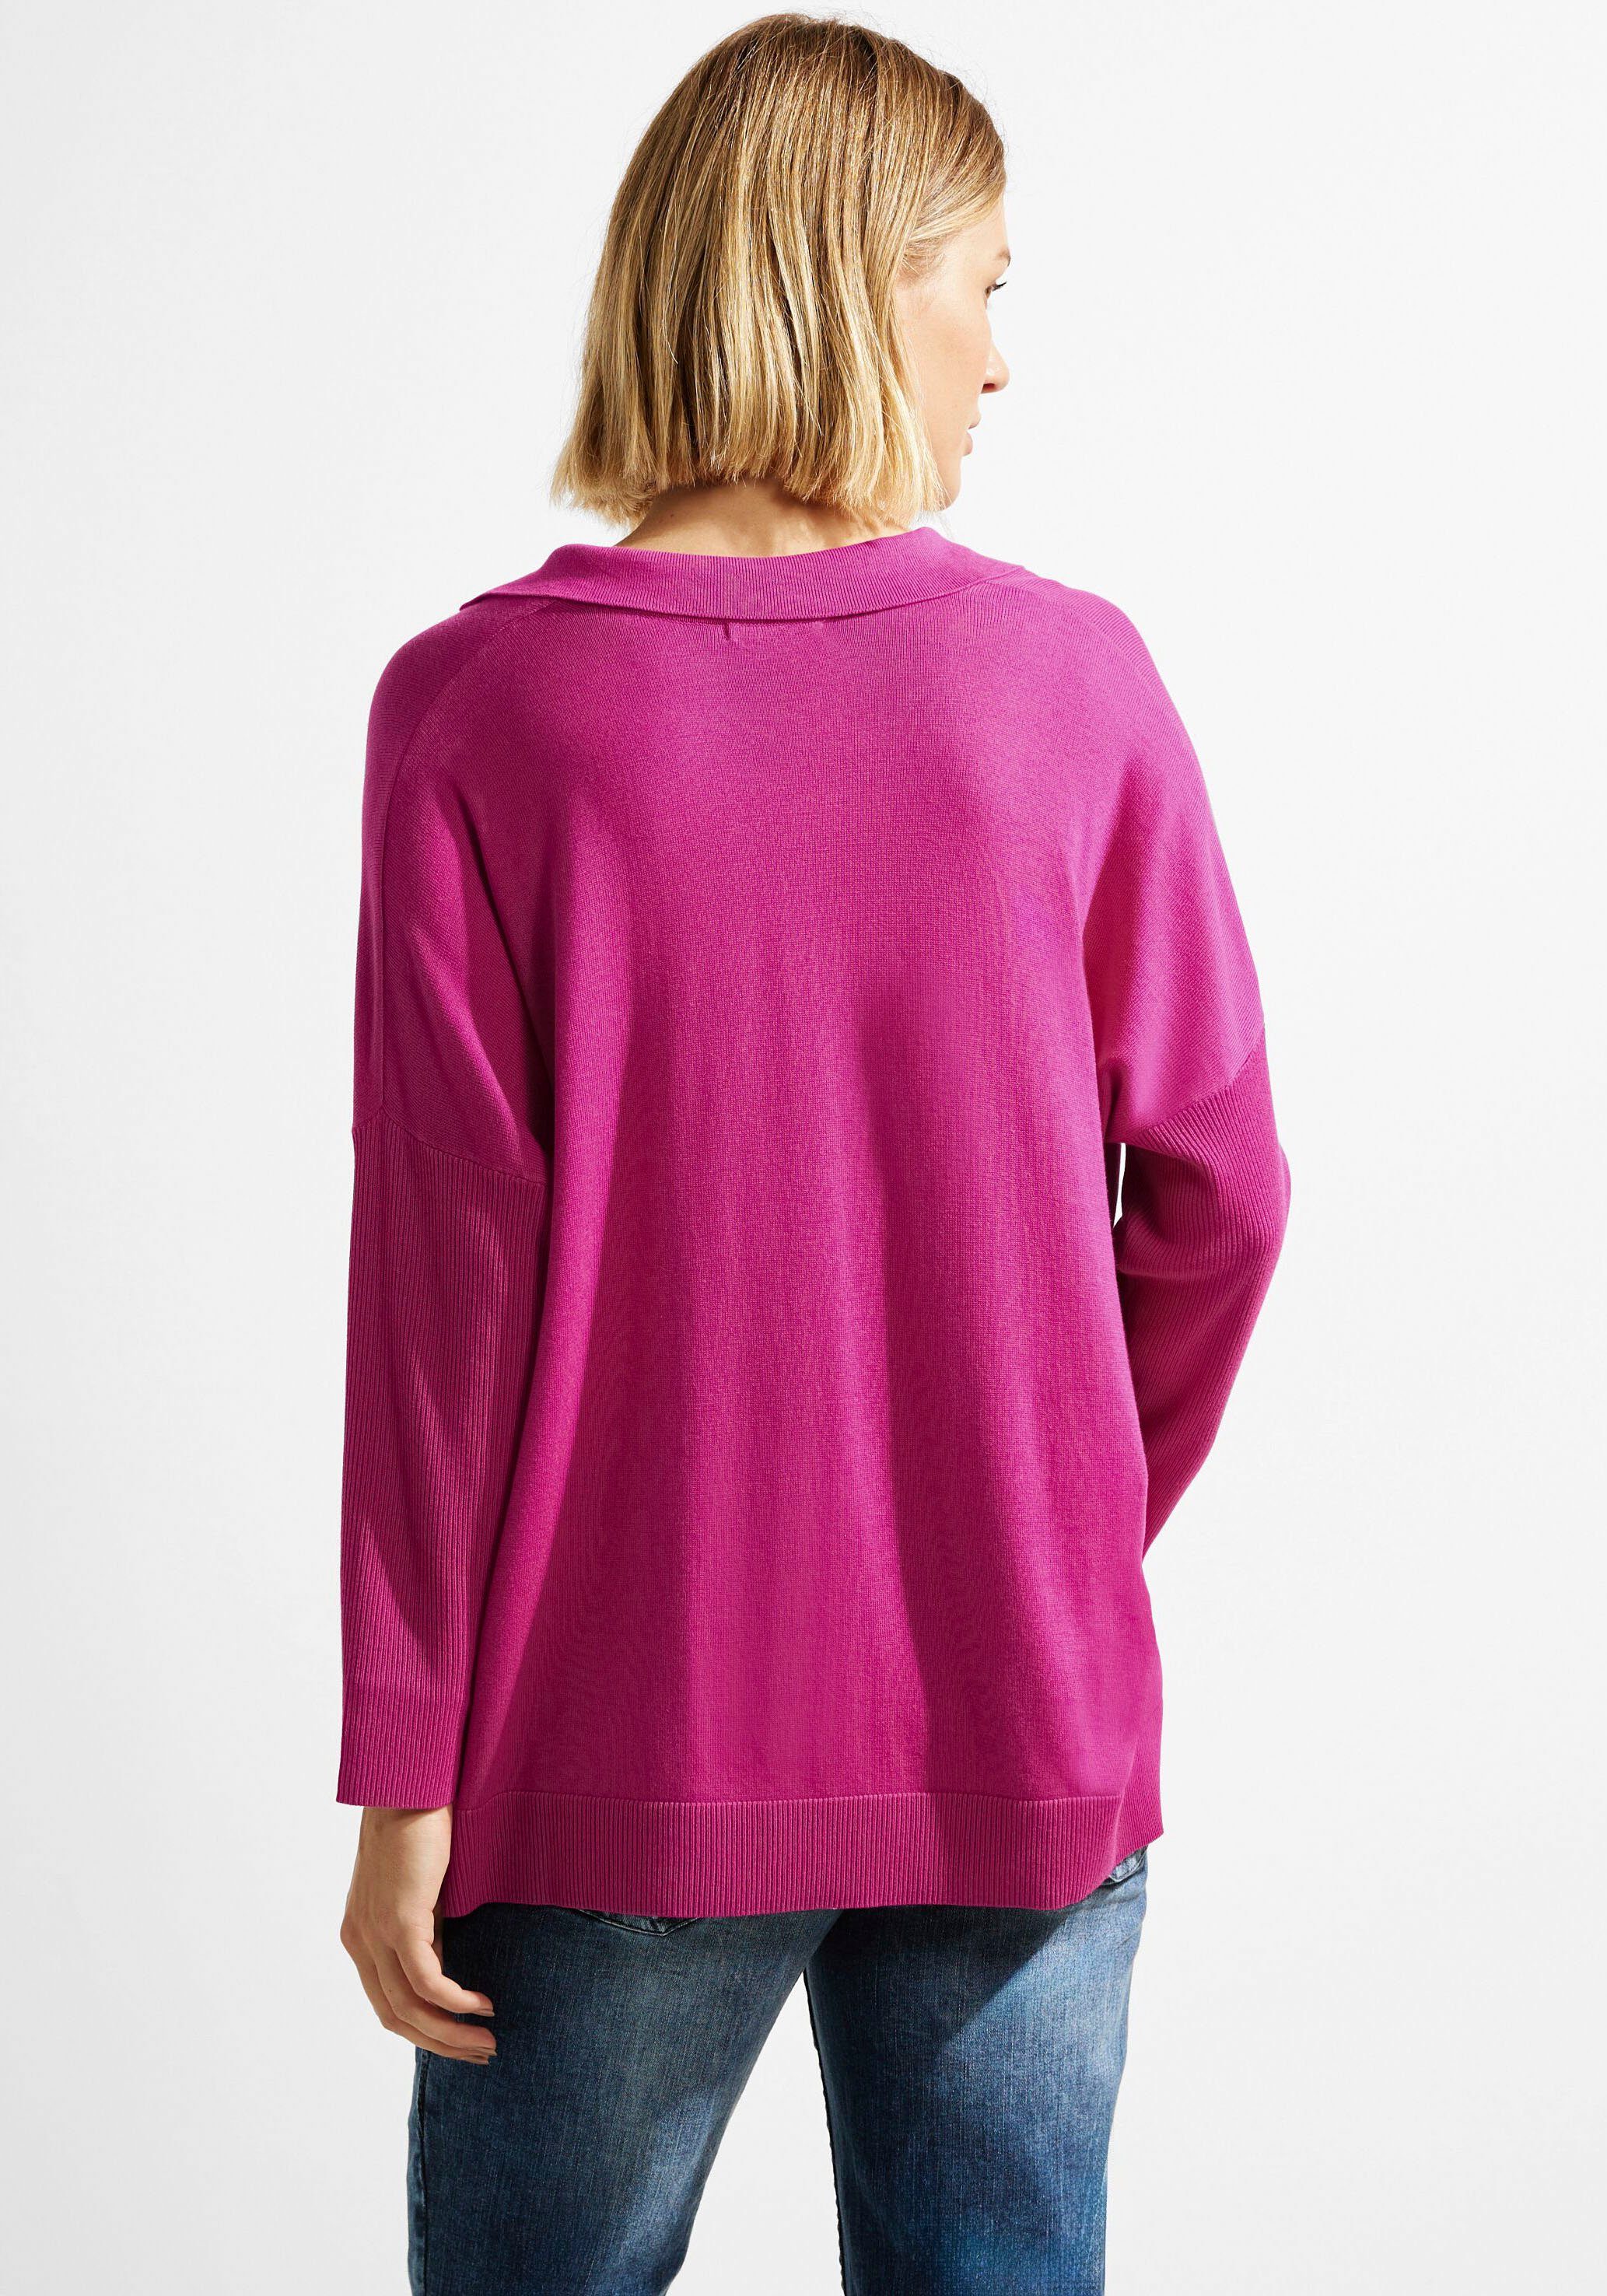 pink Polokragenpullover Cecil in Unifarbe cool